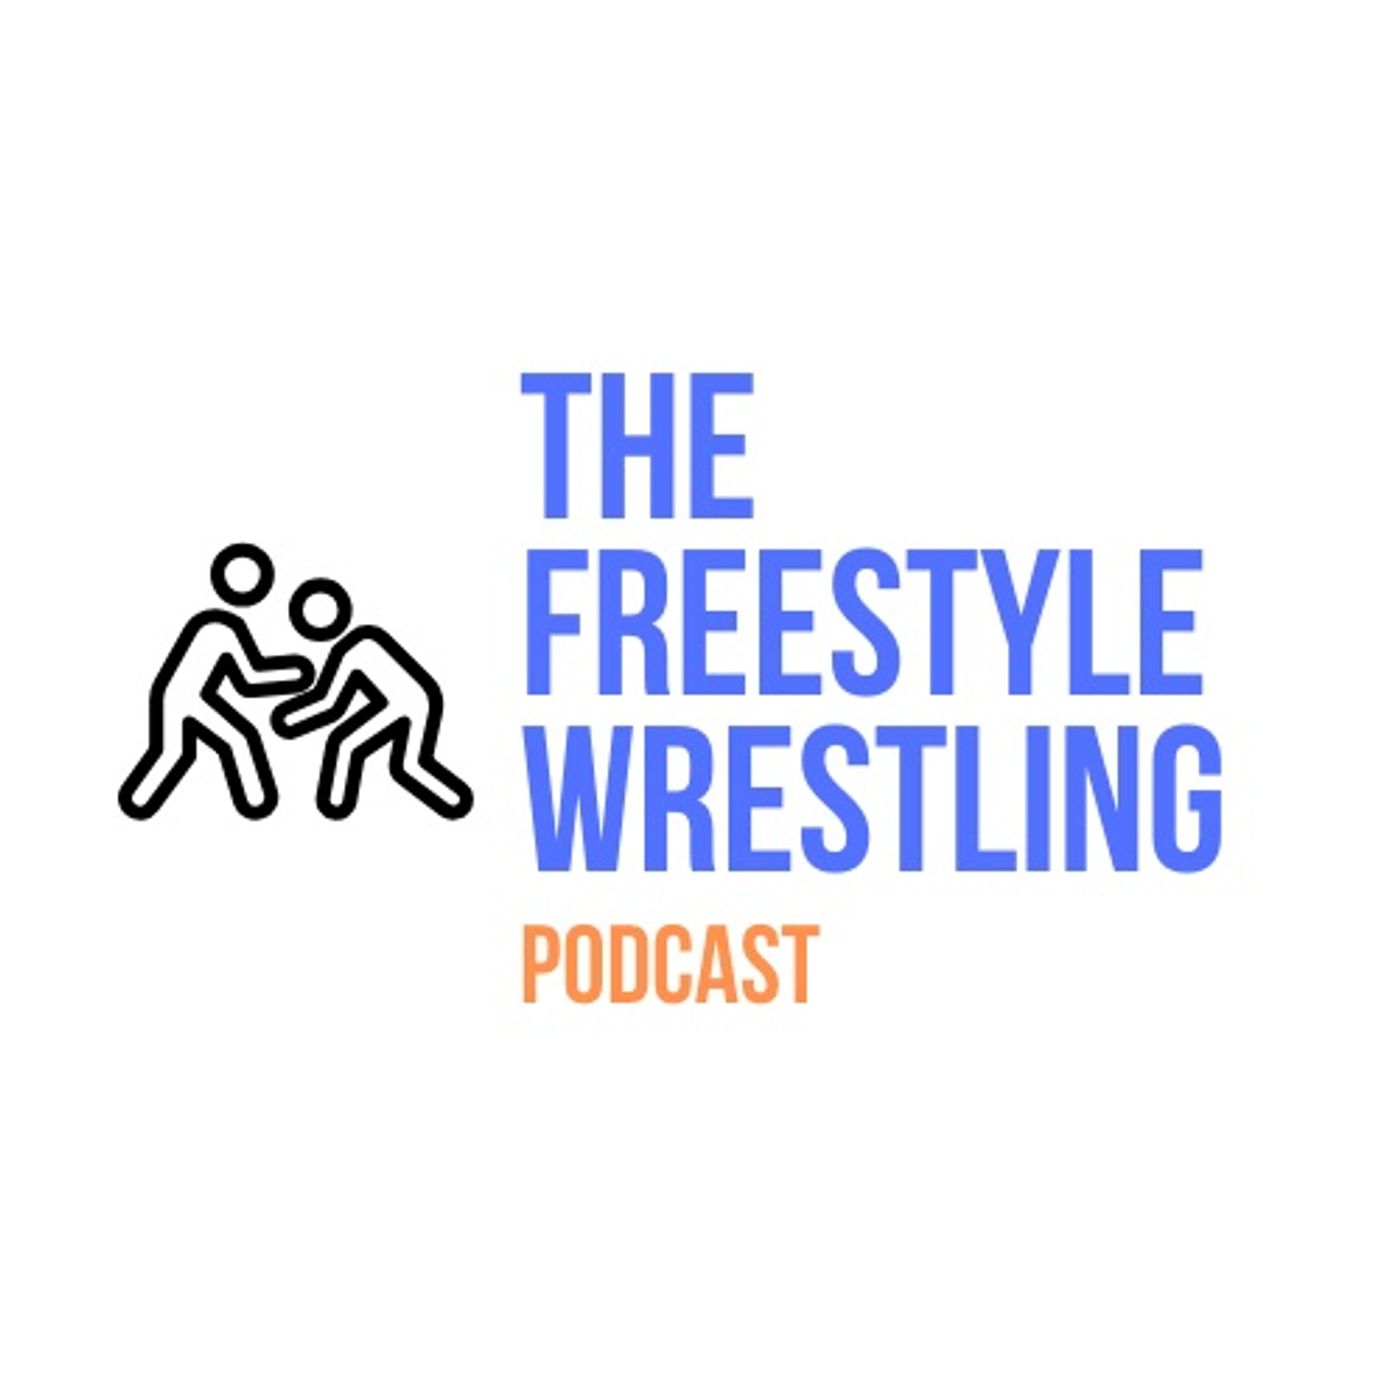 The Freestyle Wrestling Podcast